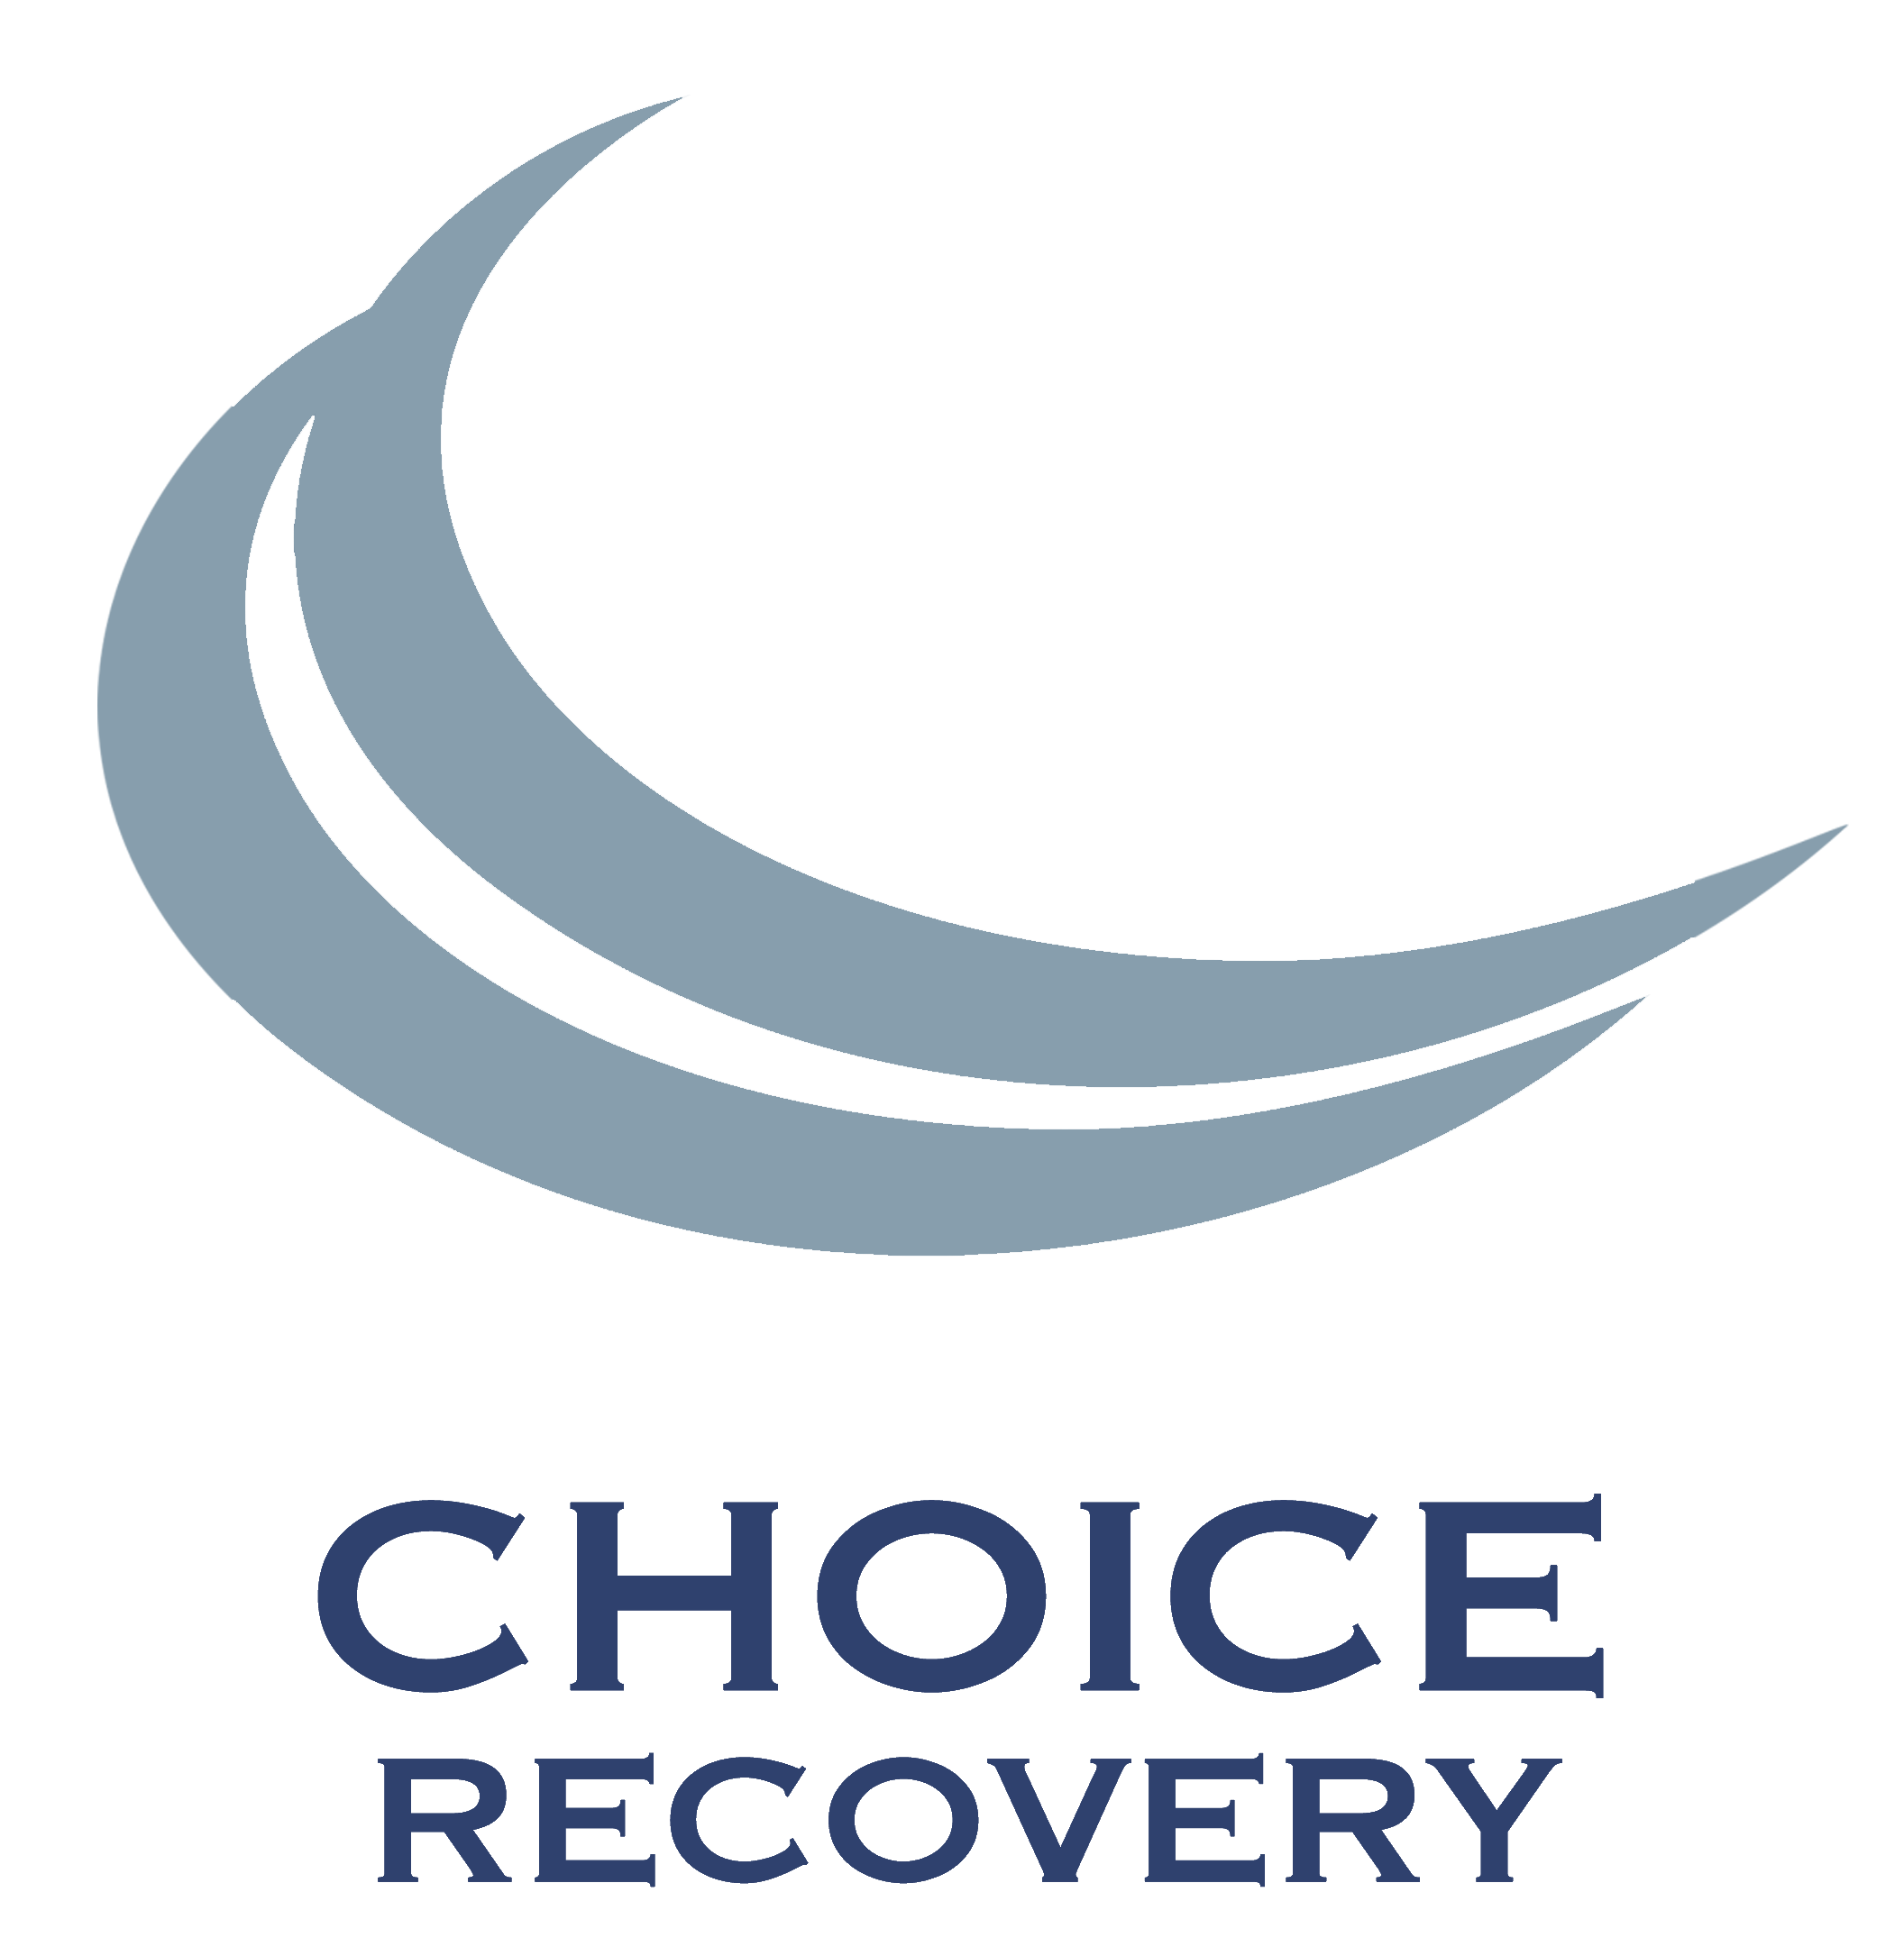 Choice Recovery